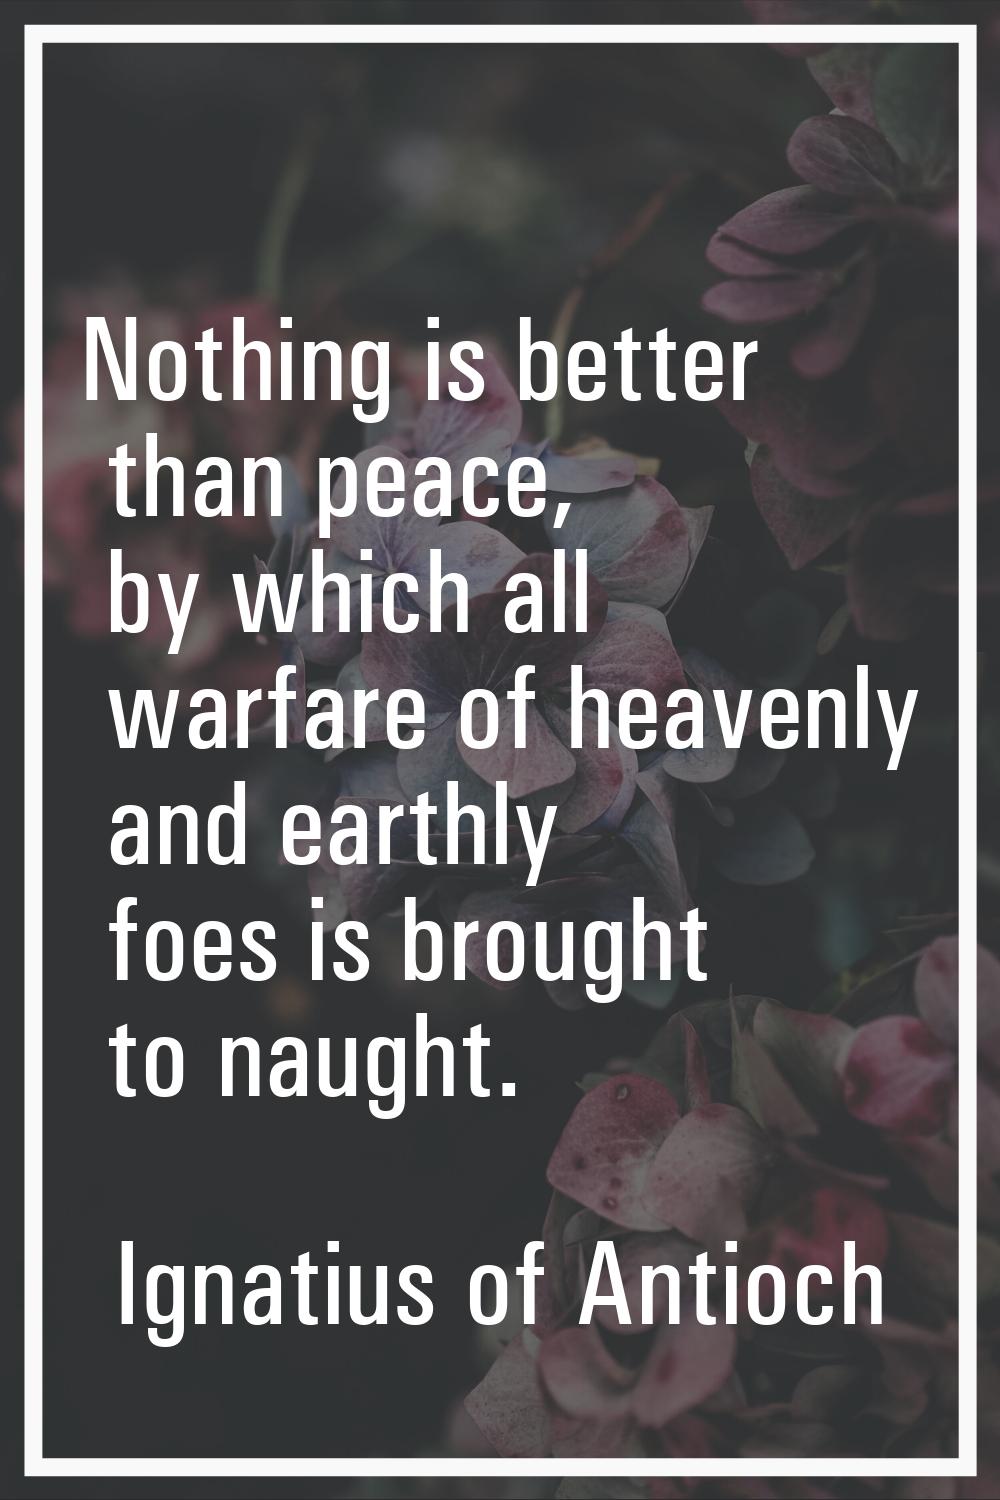 Nothing is better than peace, by which all warfare of heavenly and earthly foes is brought to naugh